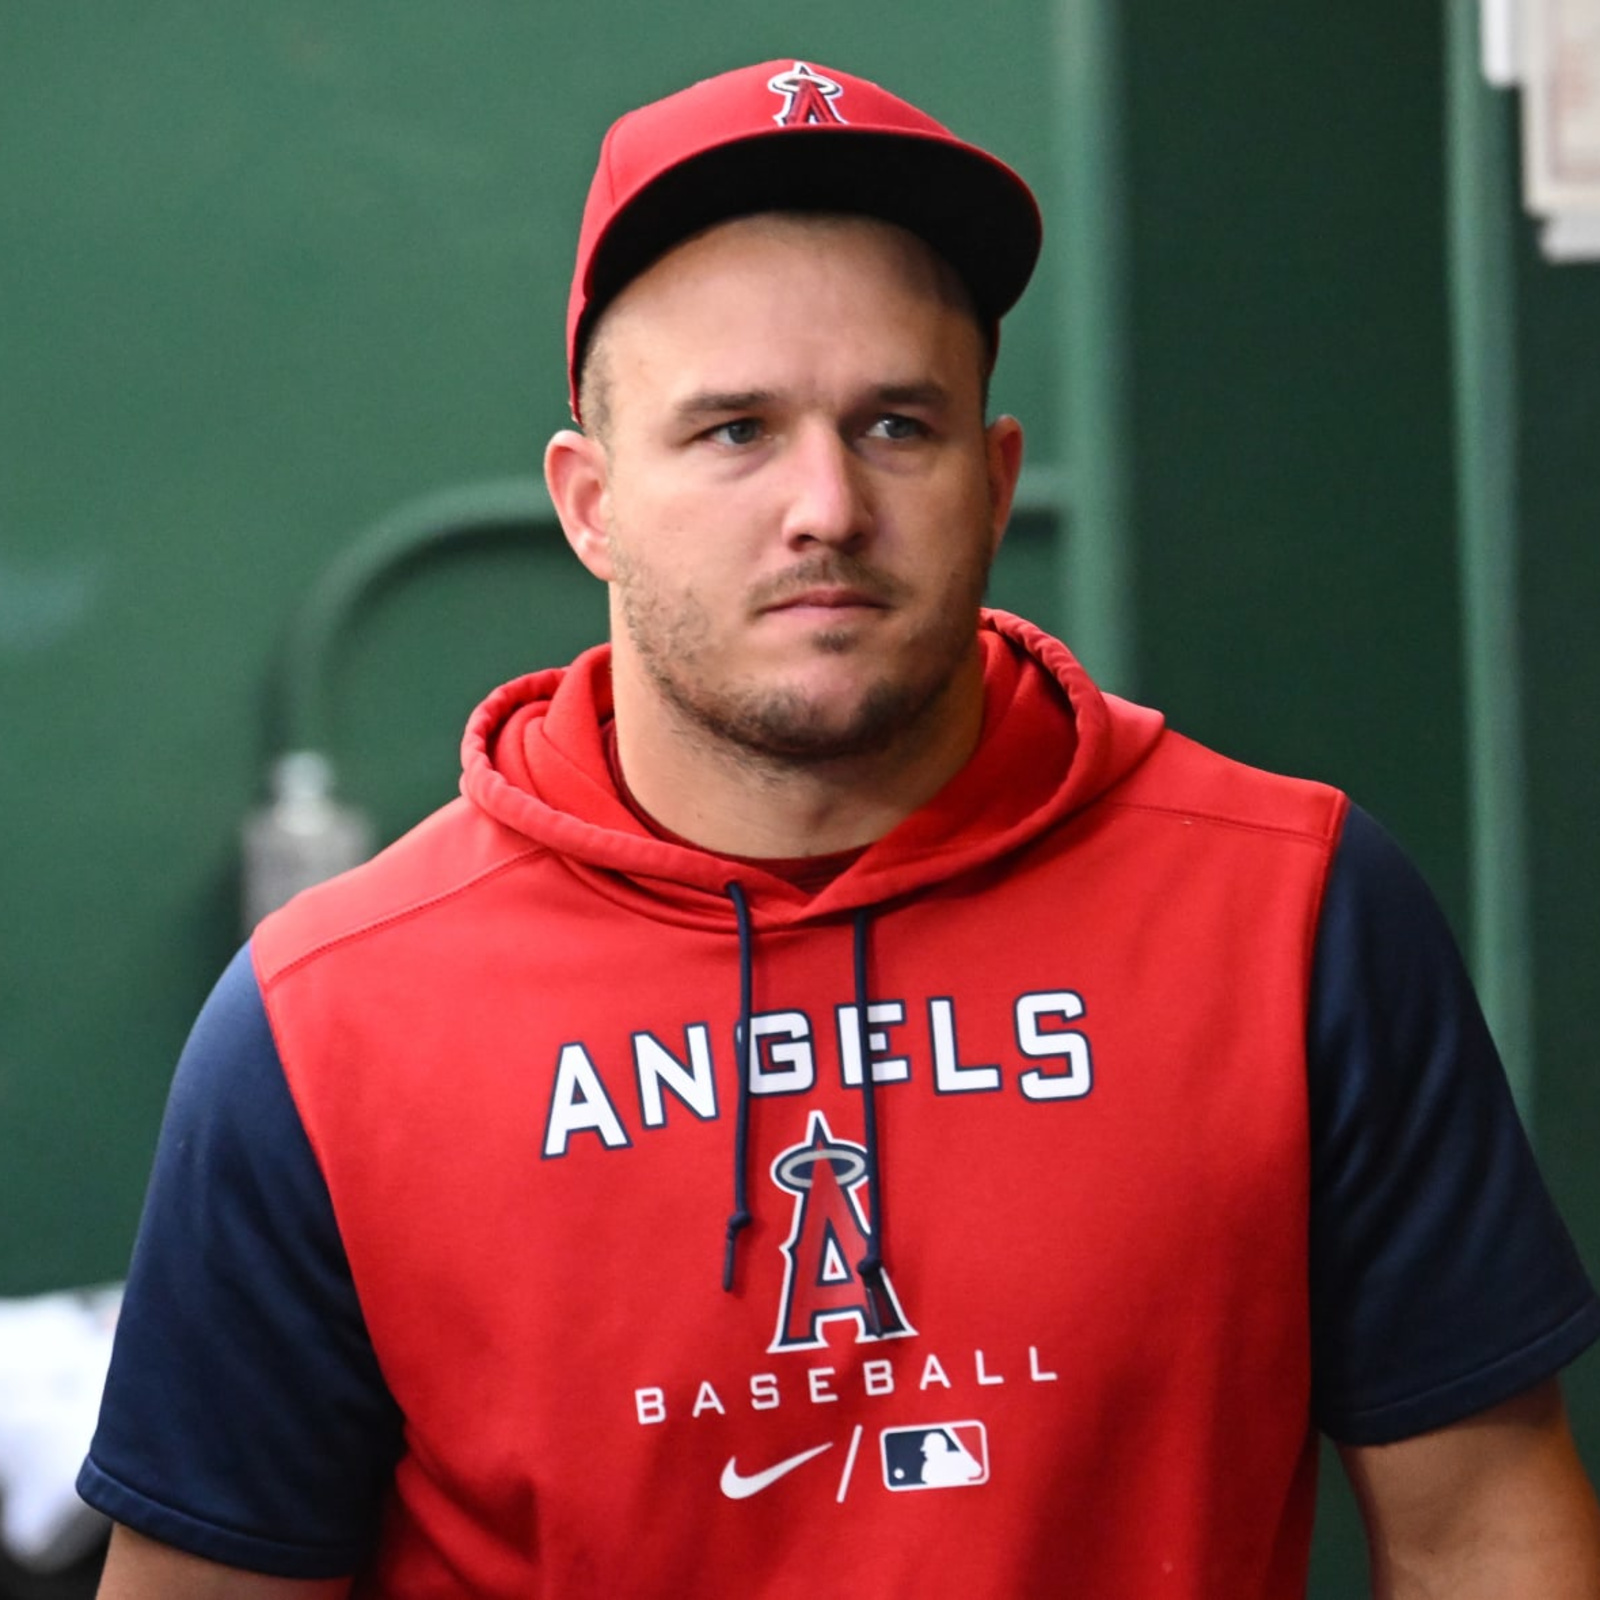 Mike Trout's Latest Injury May Leave the Angels Floundering